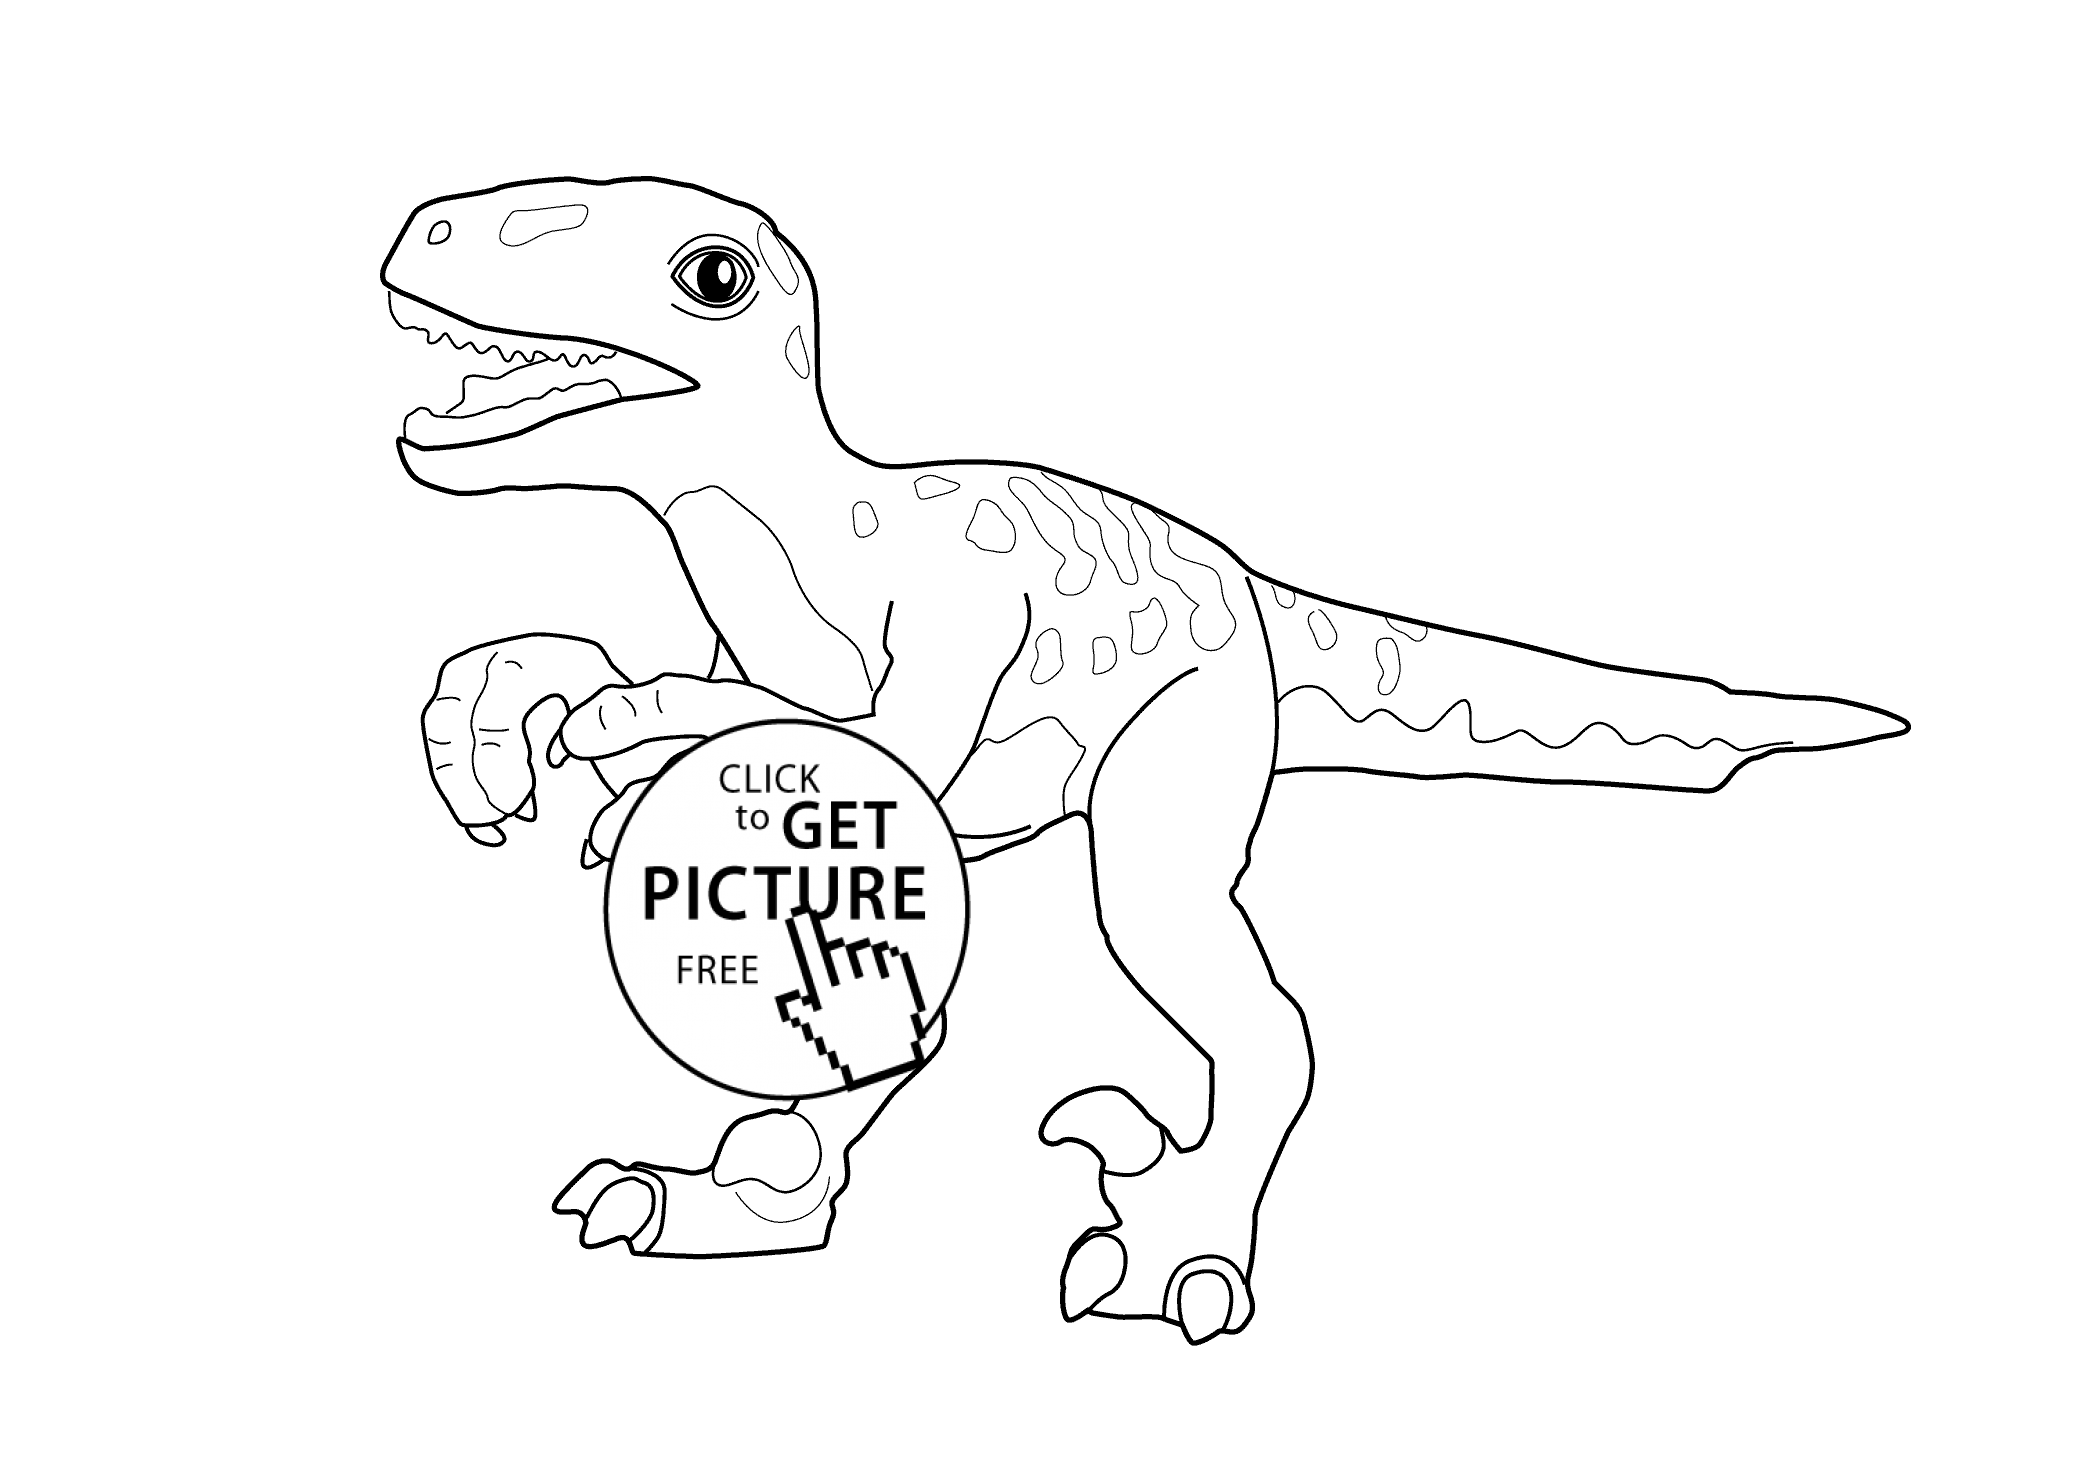 T-rex Dinosaur coloring page for kids, printable free